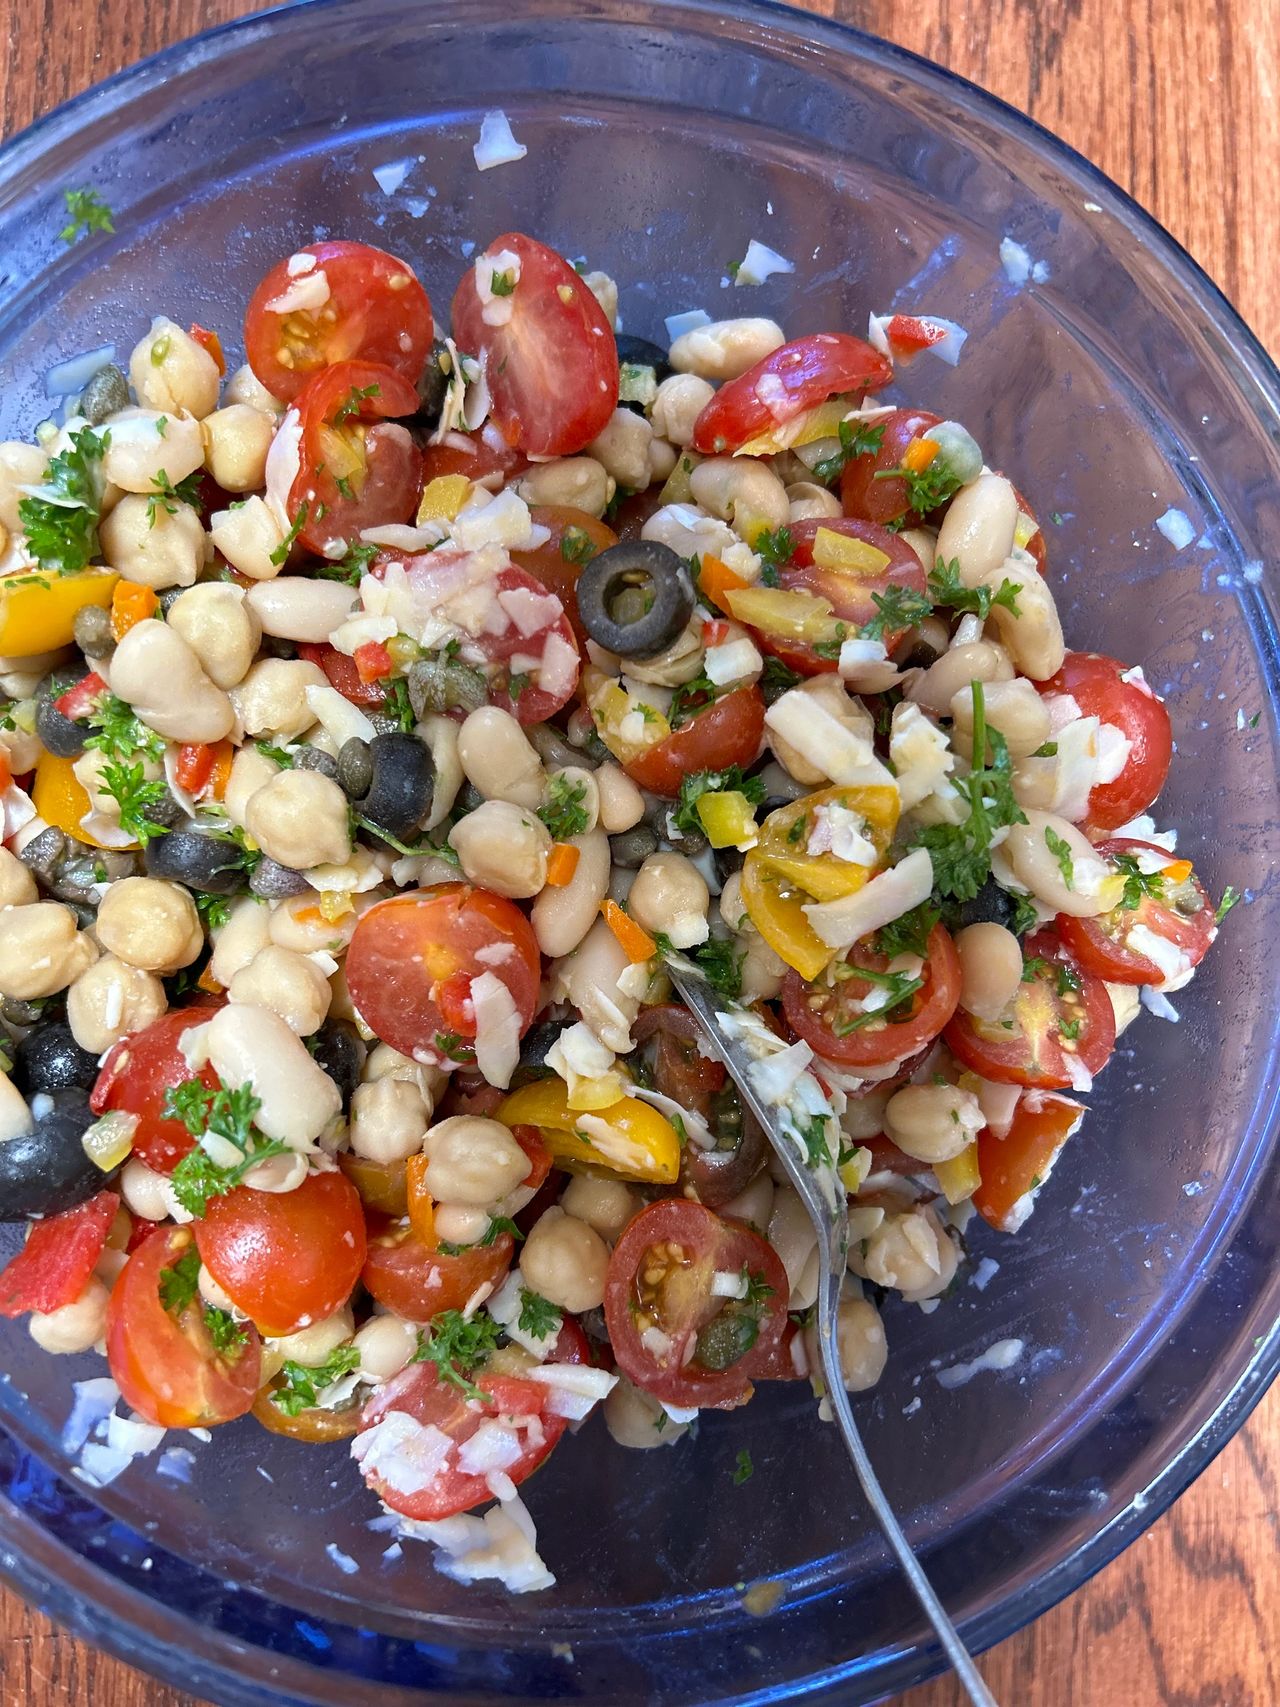 Cherry tomatoes and chickpea salad